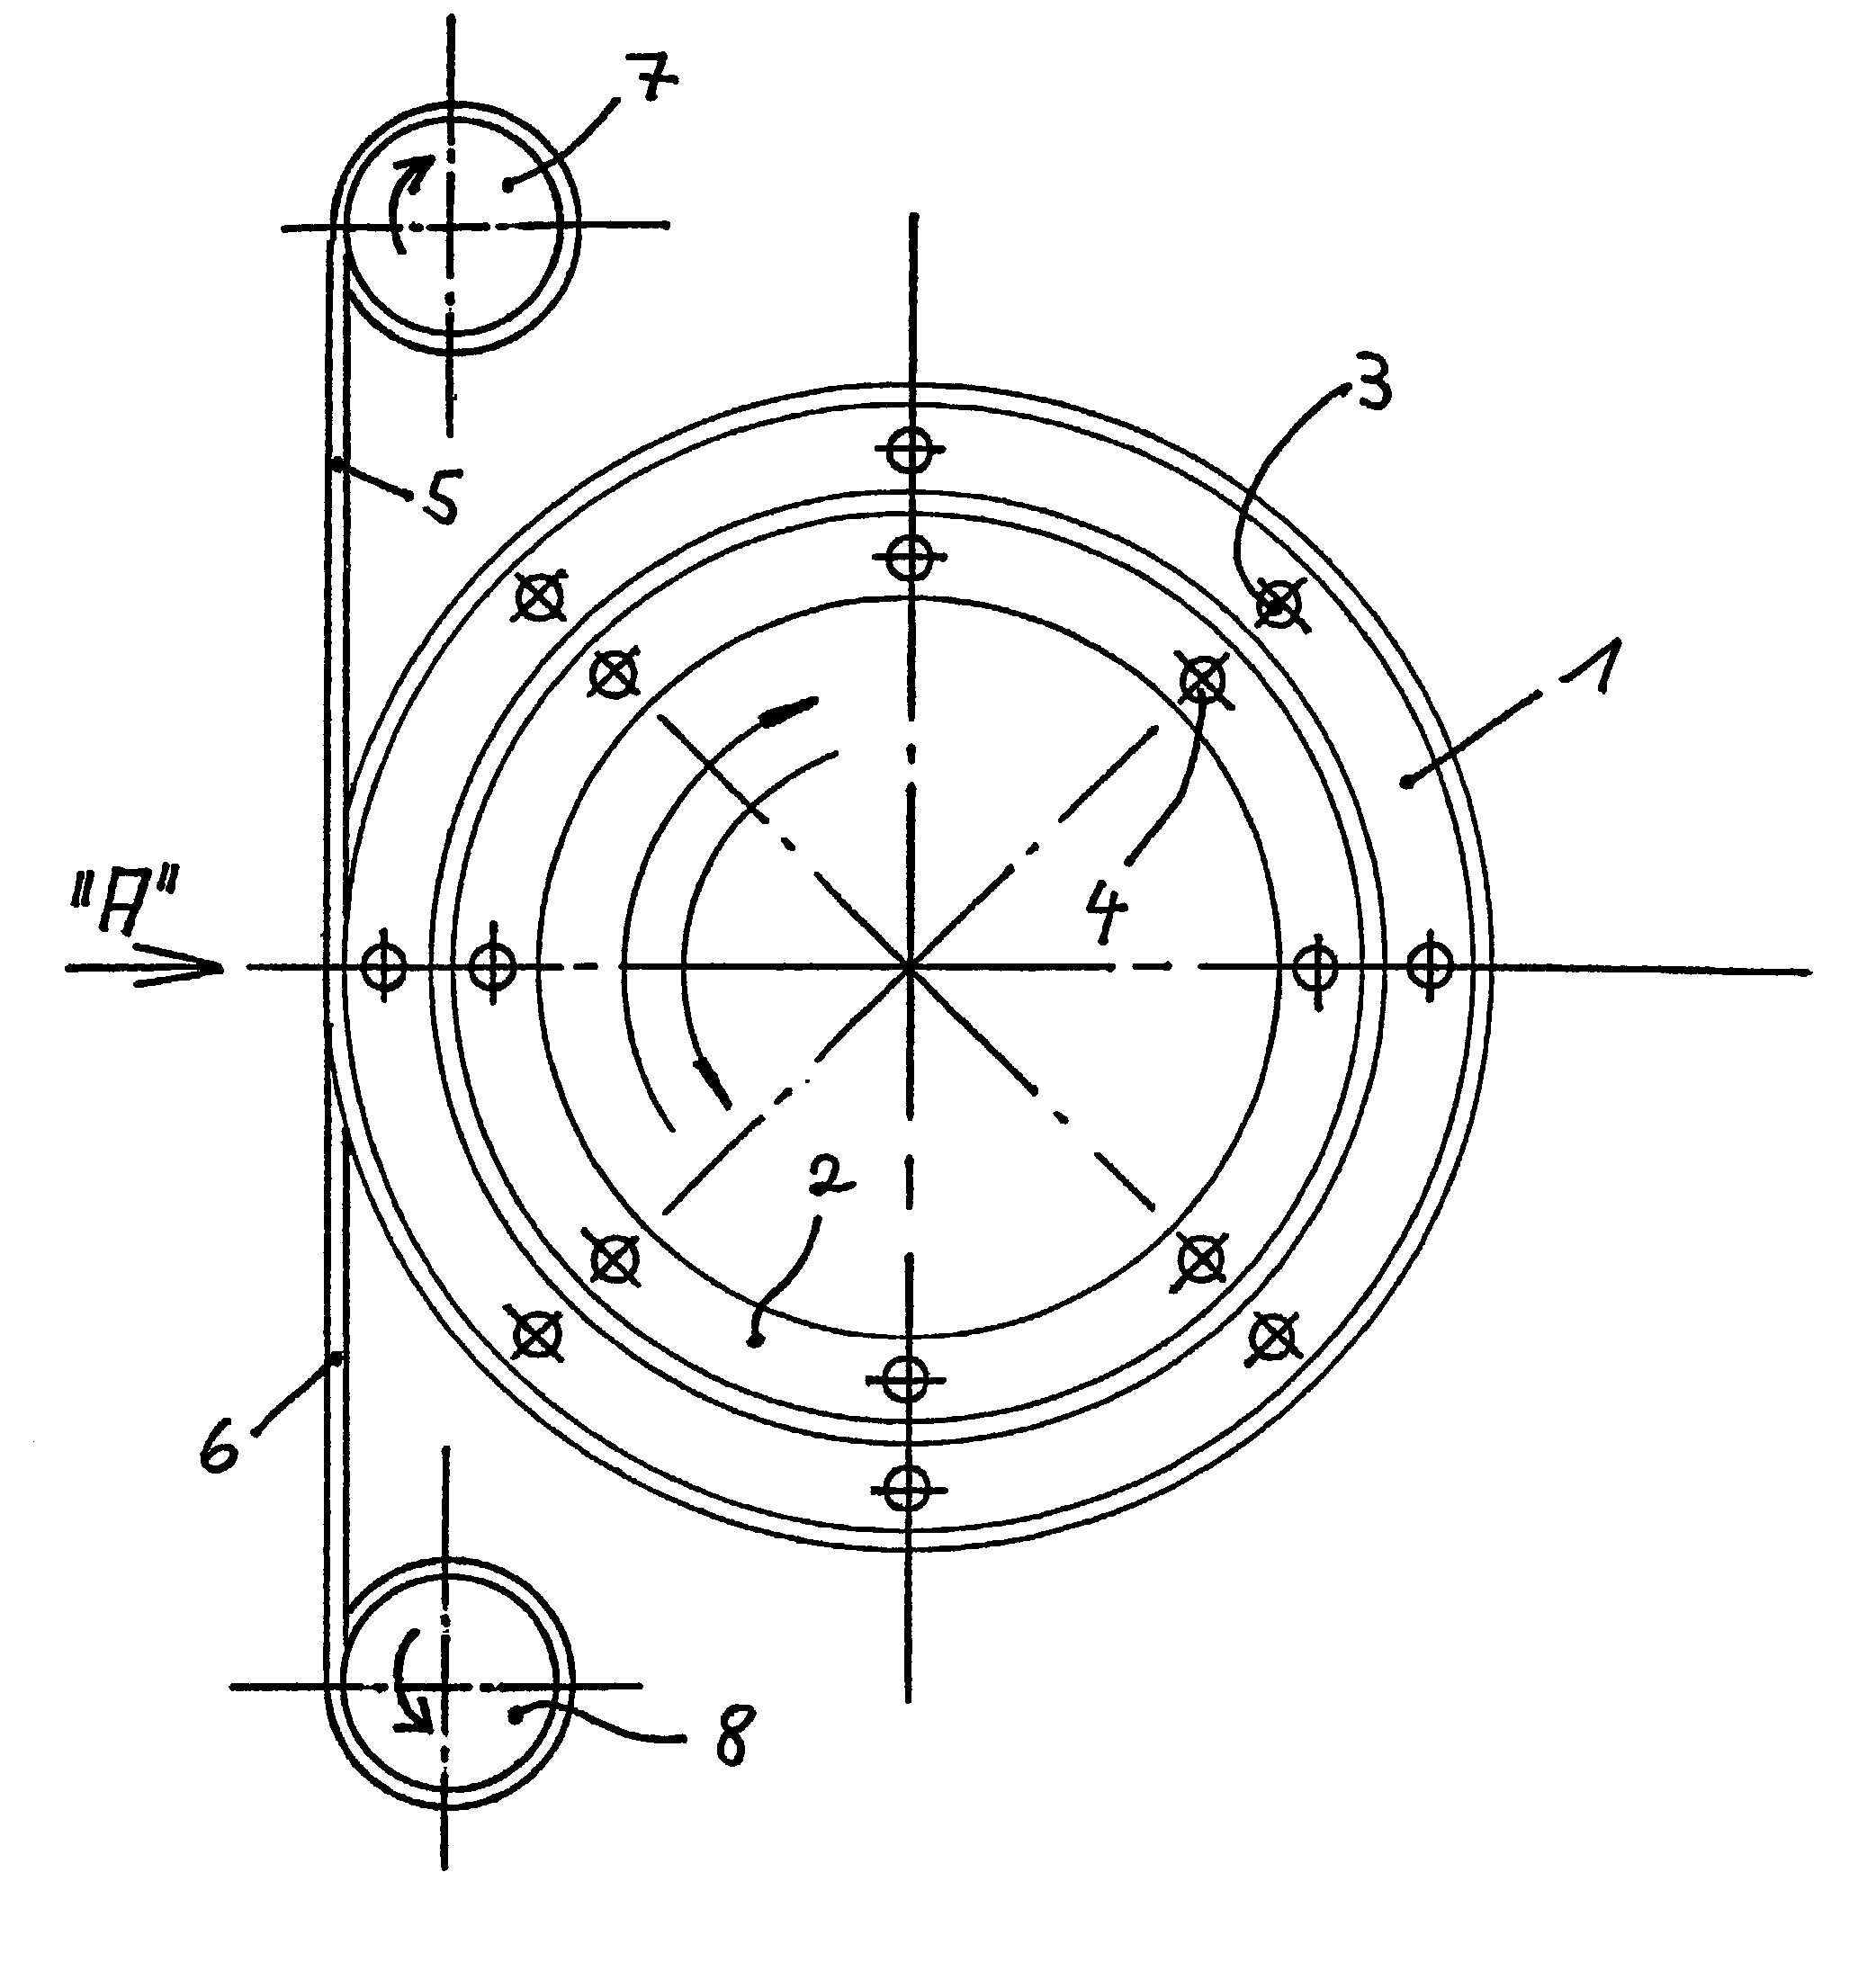 Rotary joint mechanism